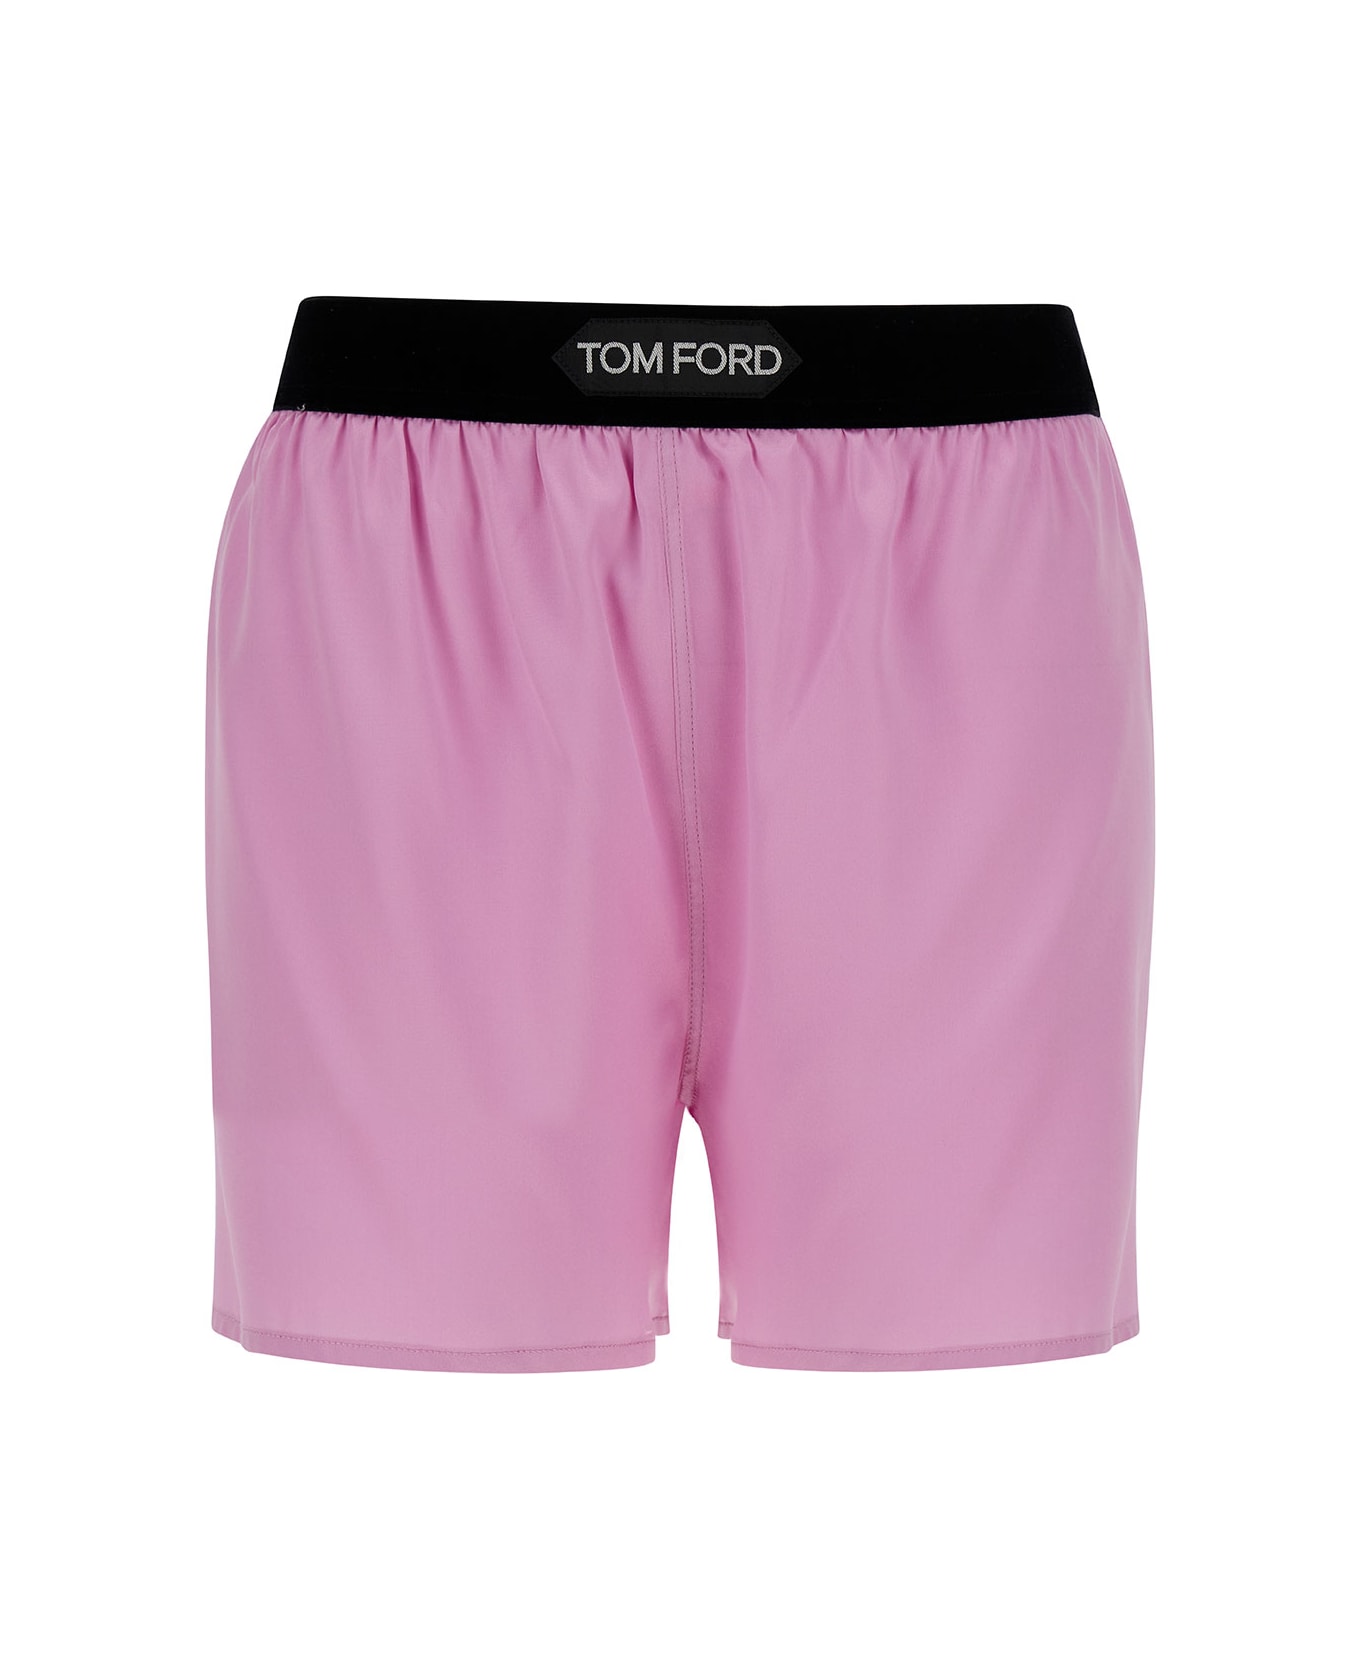 Tom Ford Pink Satin Shorts With Logo On Waistband In Stretch Silk Woman - Pink